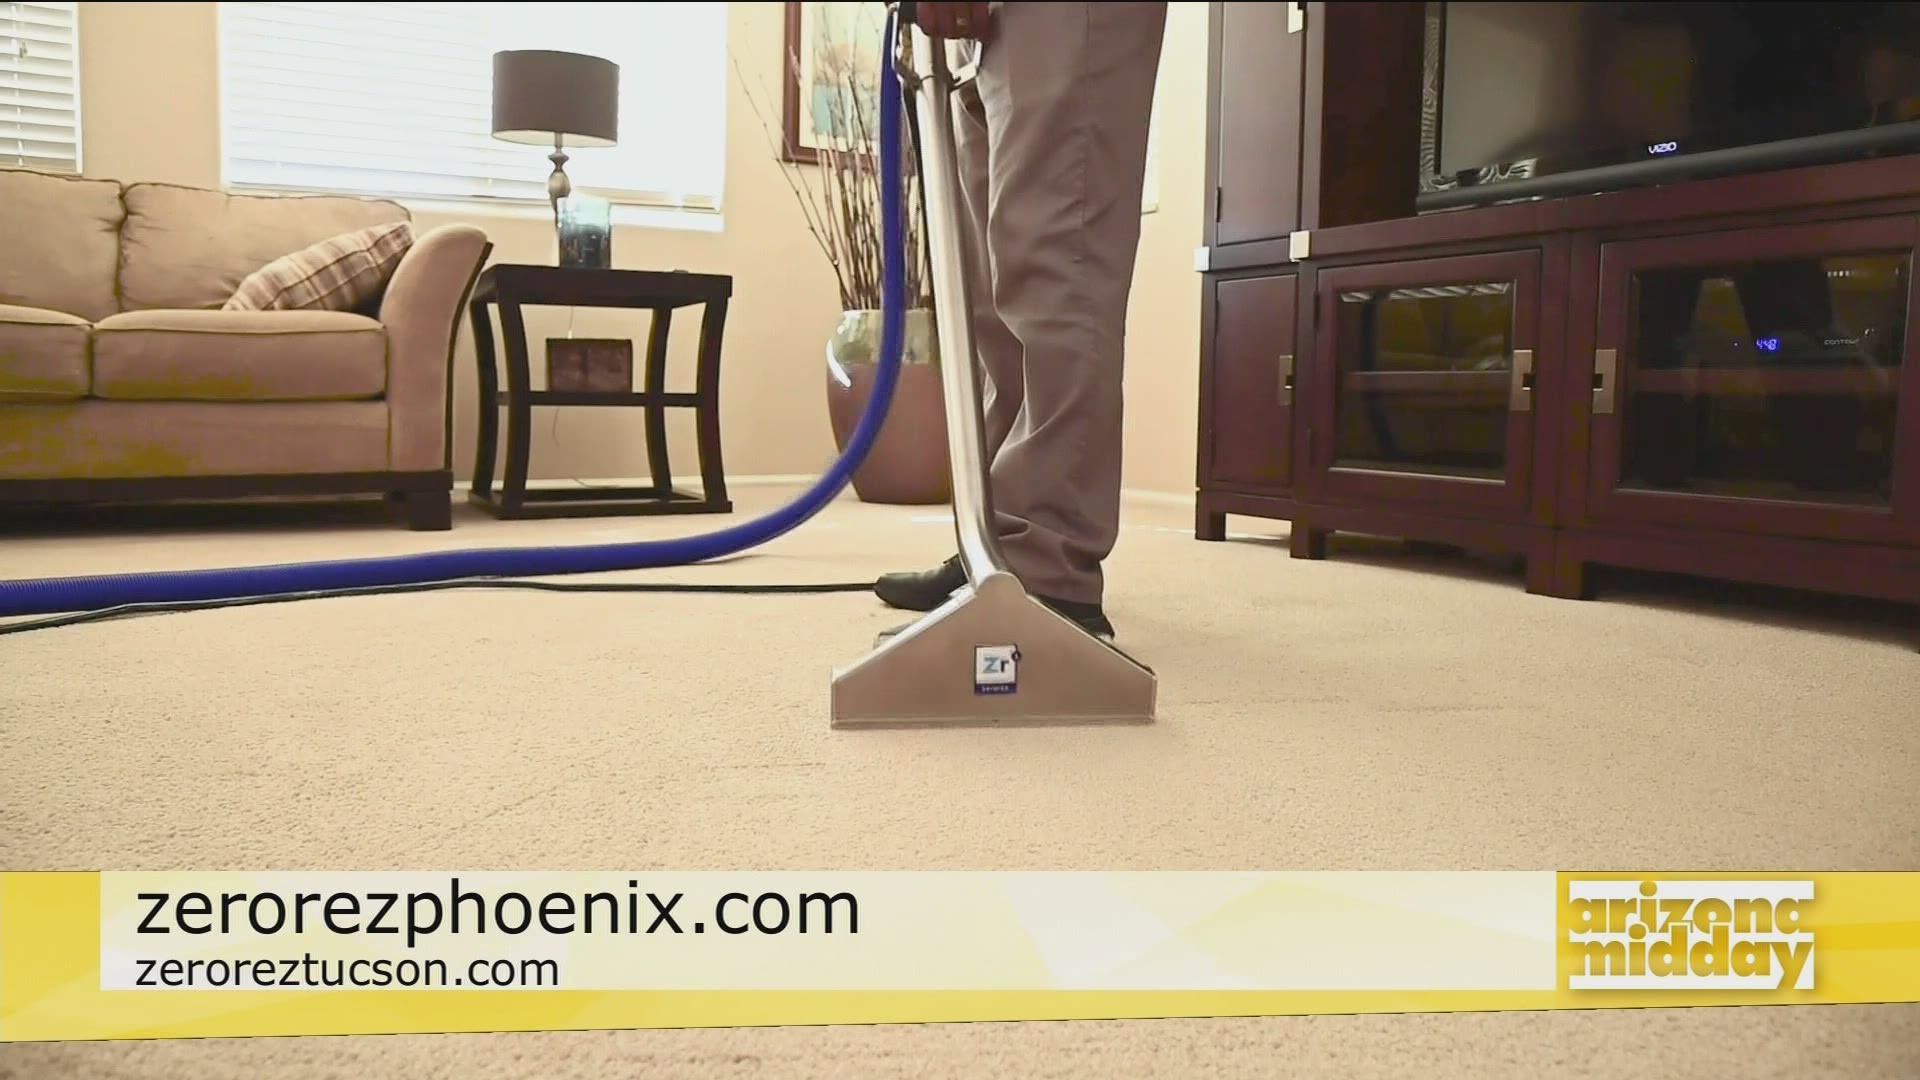 Scott with Zerorez tells us why carpets crunch after cleaning and how Zerorez cleans without that chemical residue plus how to get a great deal!